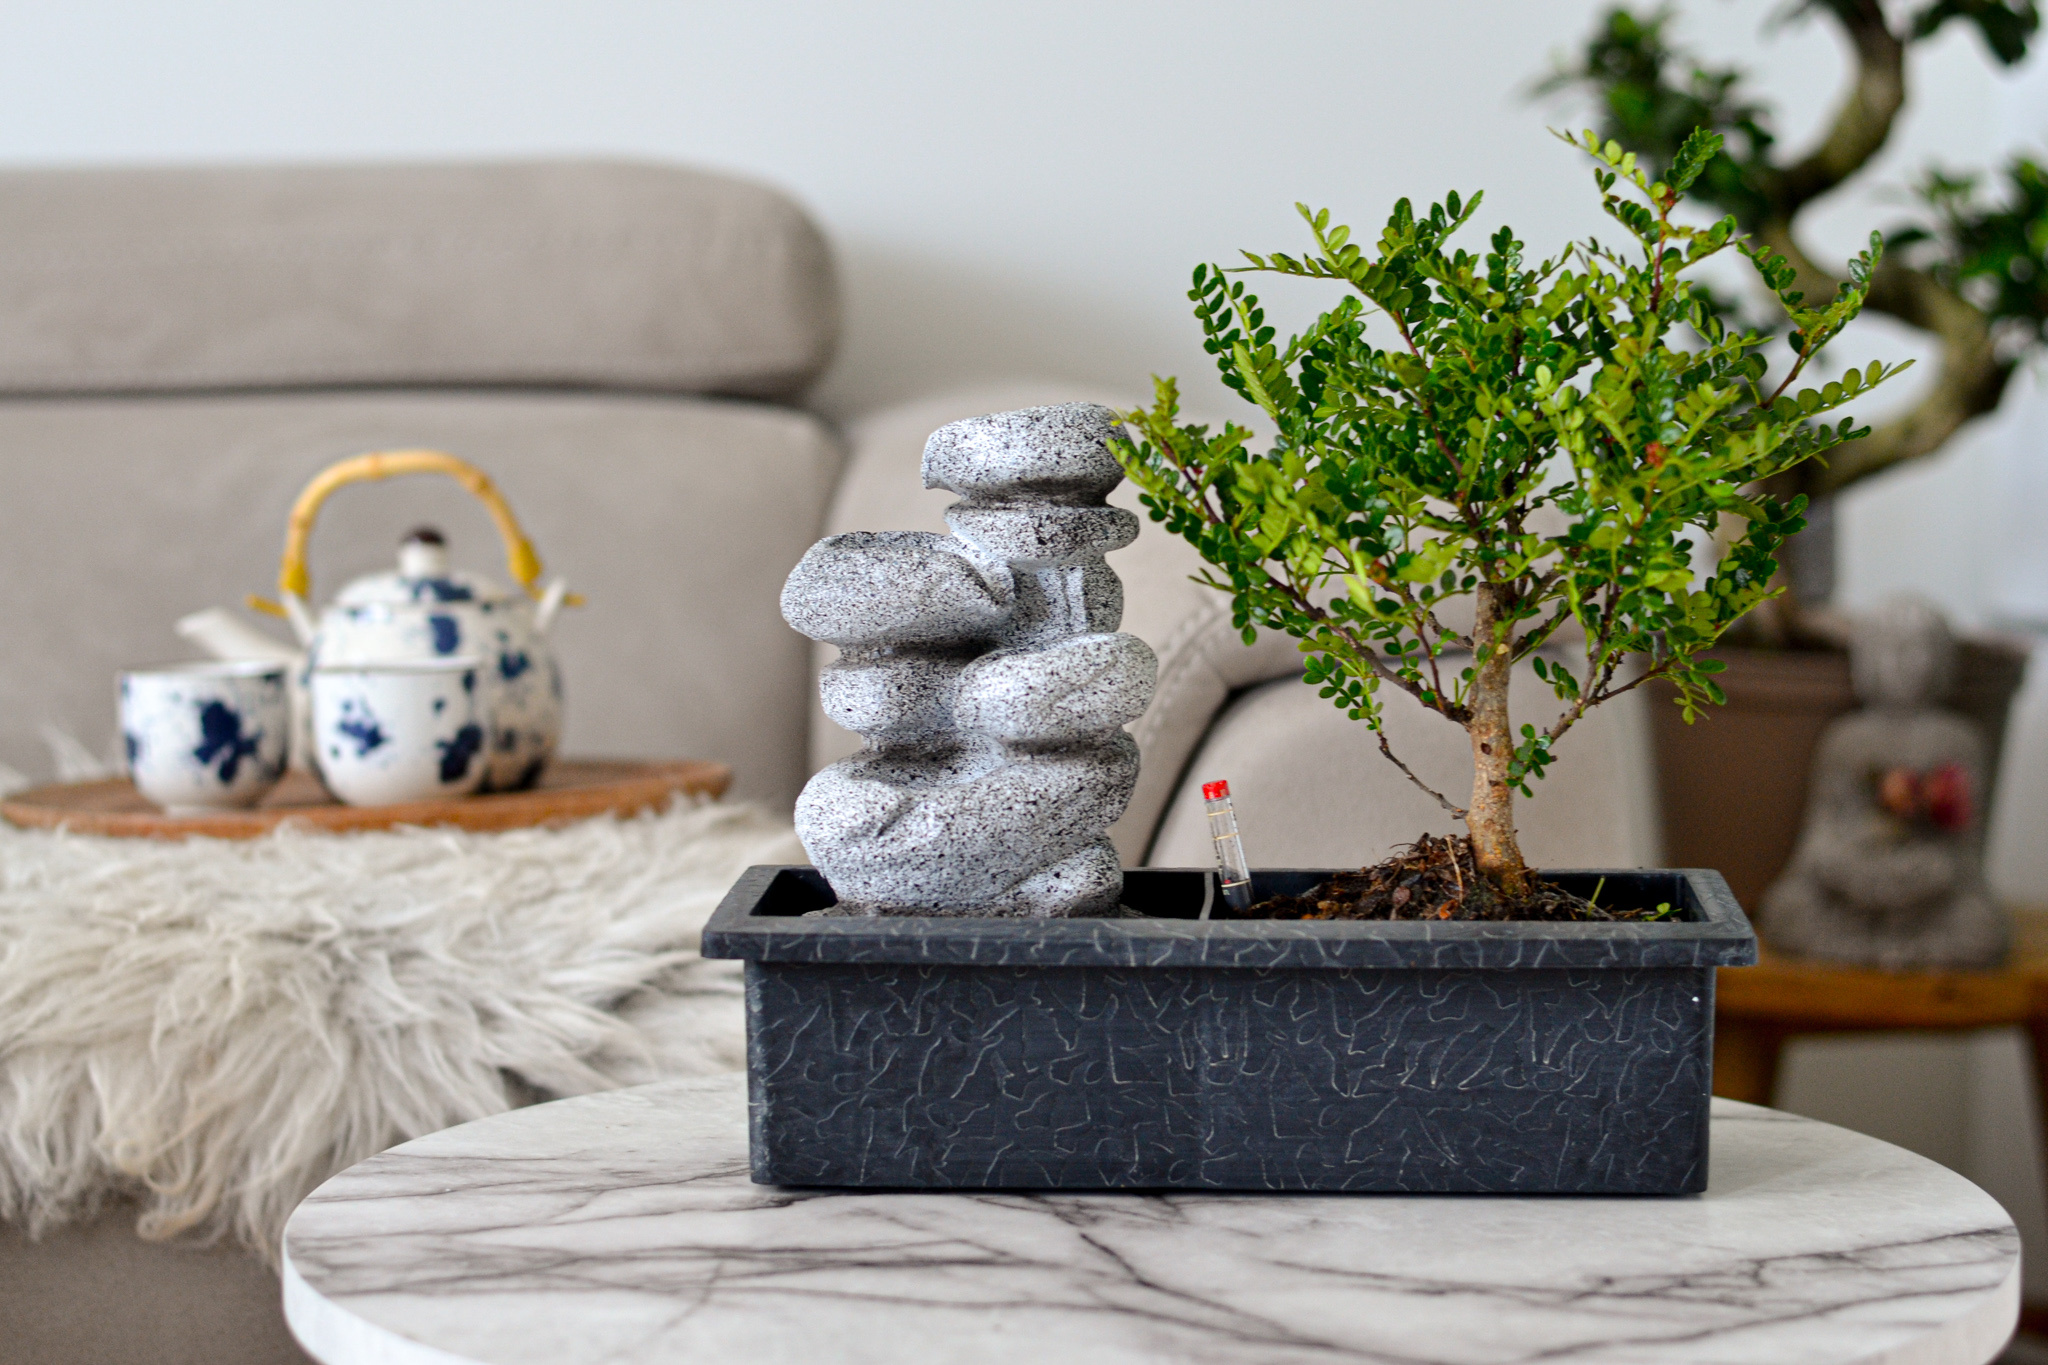 Bonsai tree with Easy-care watering system - x2 - Zen stones - Height  25-35cm